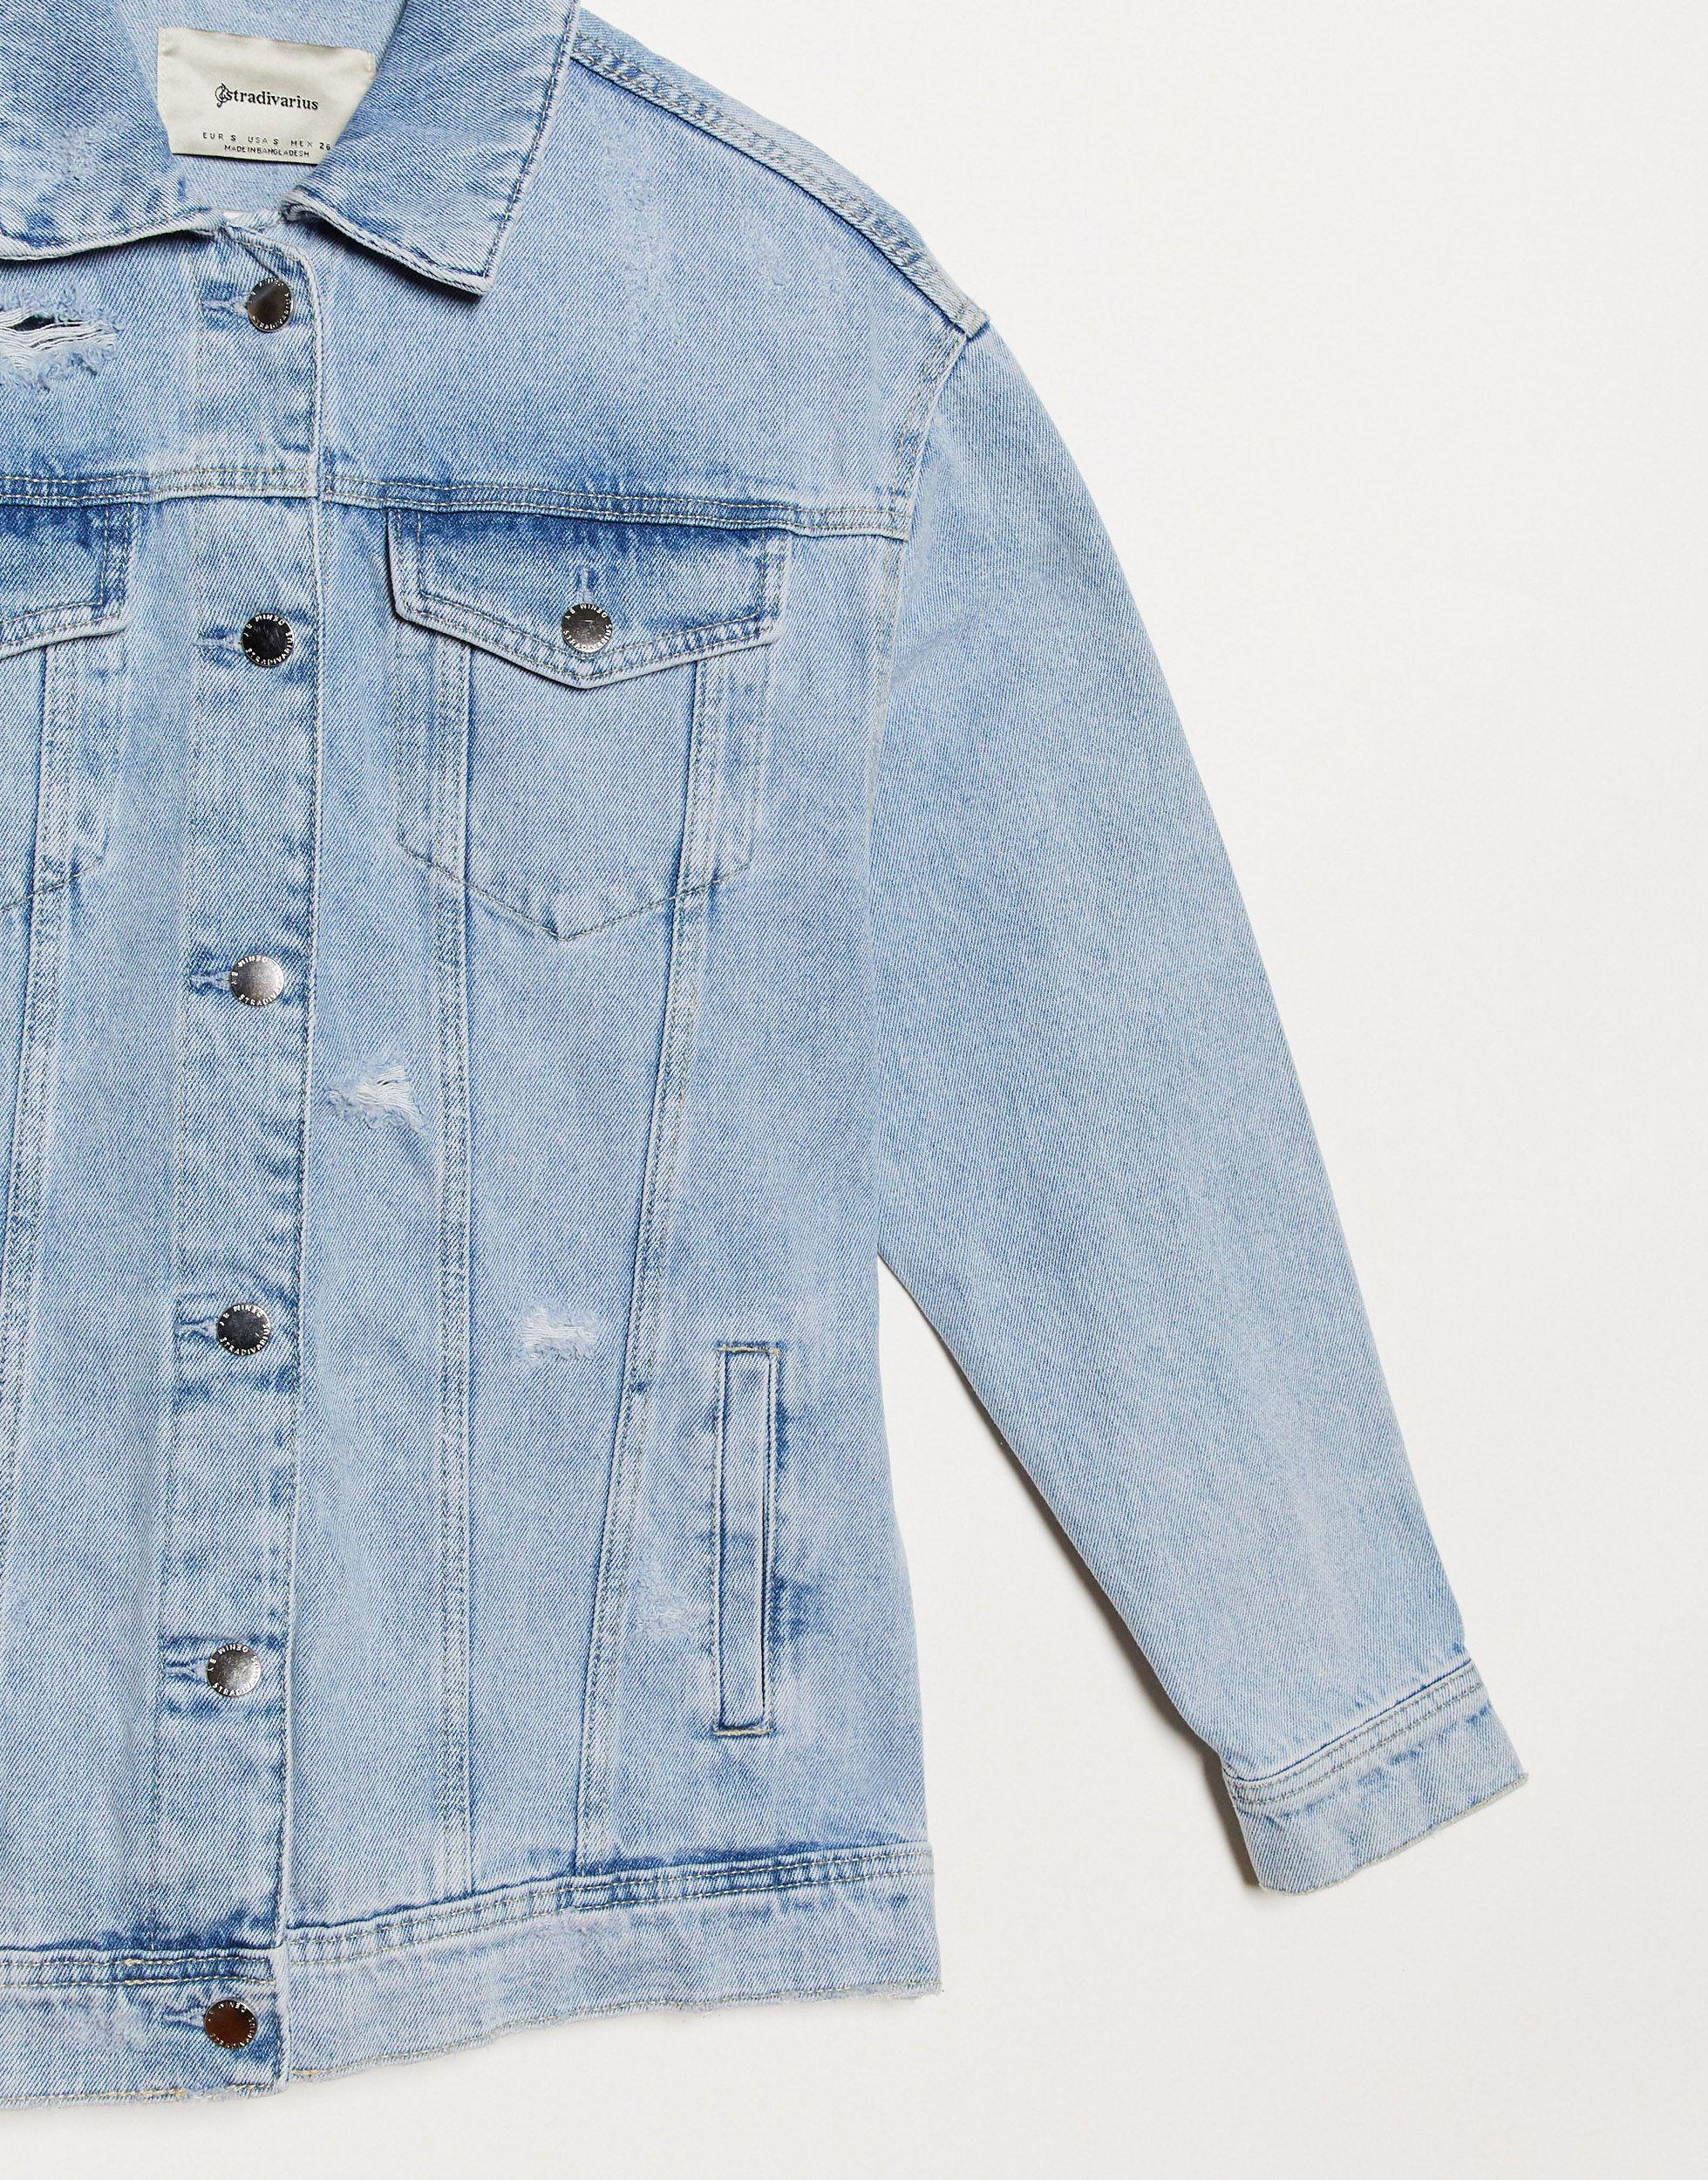 Stradivarius Oversized Denim Jacket With Rips, Bleached Pattern in Blue -  Lyst